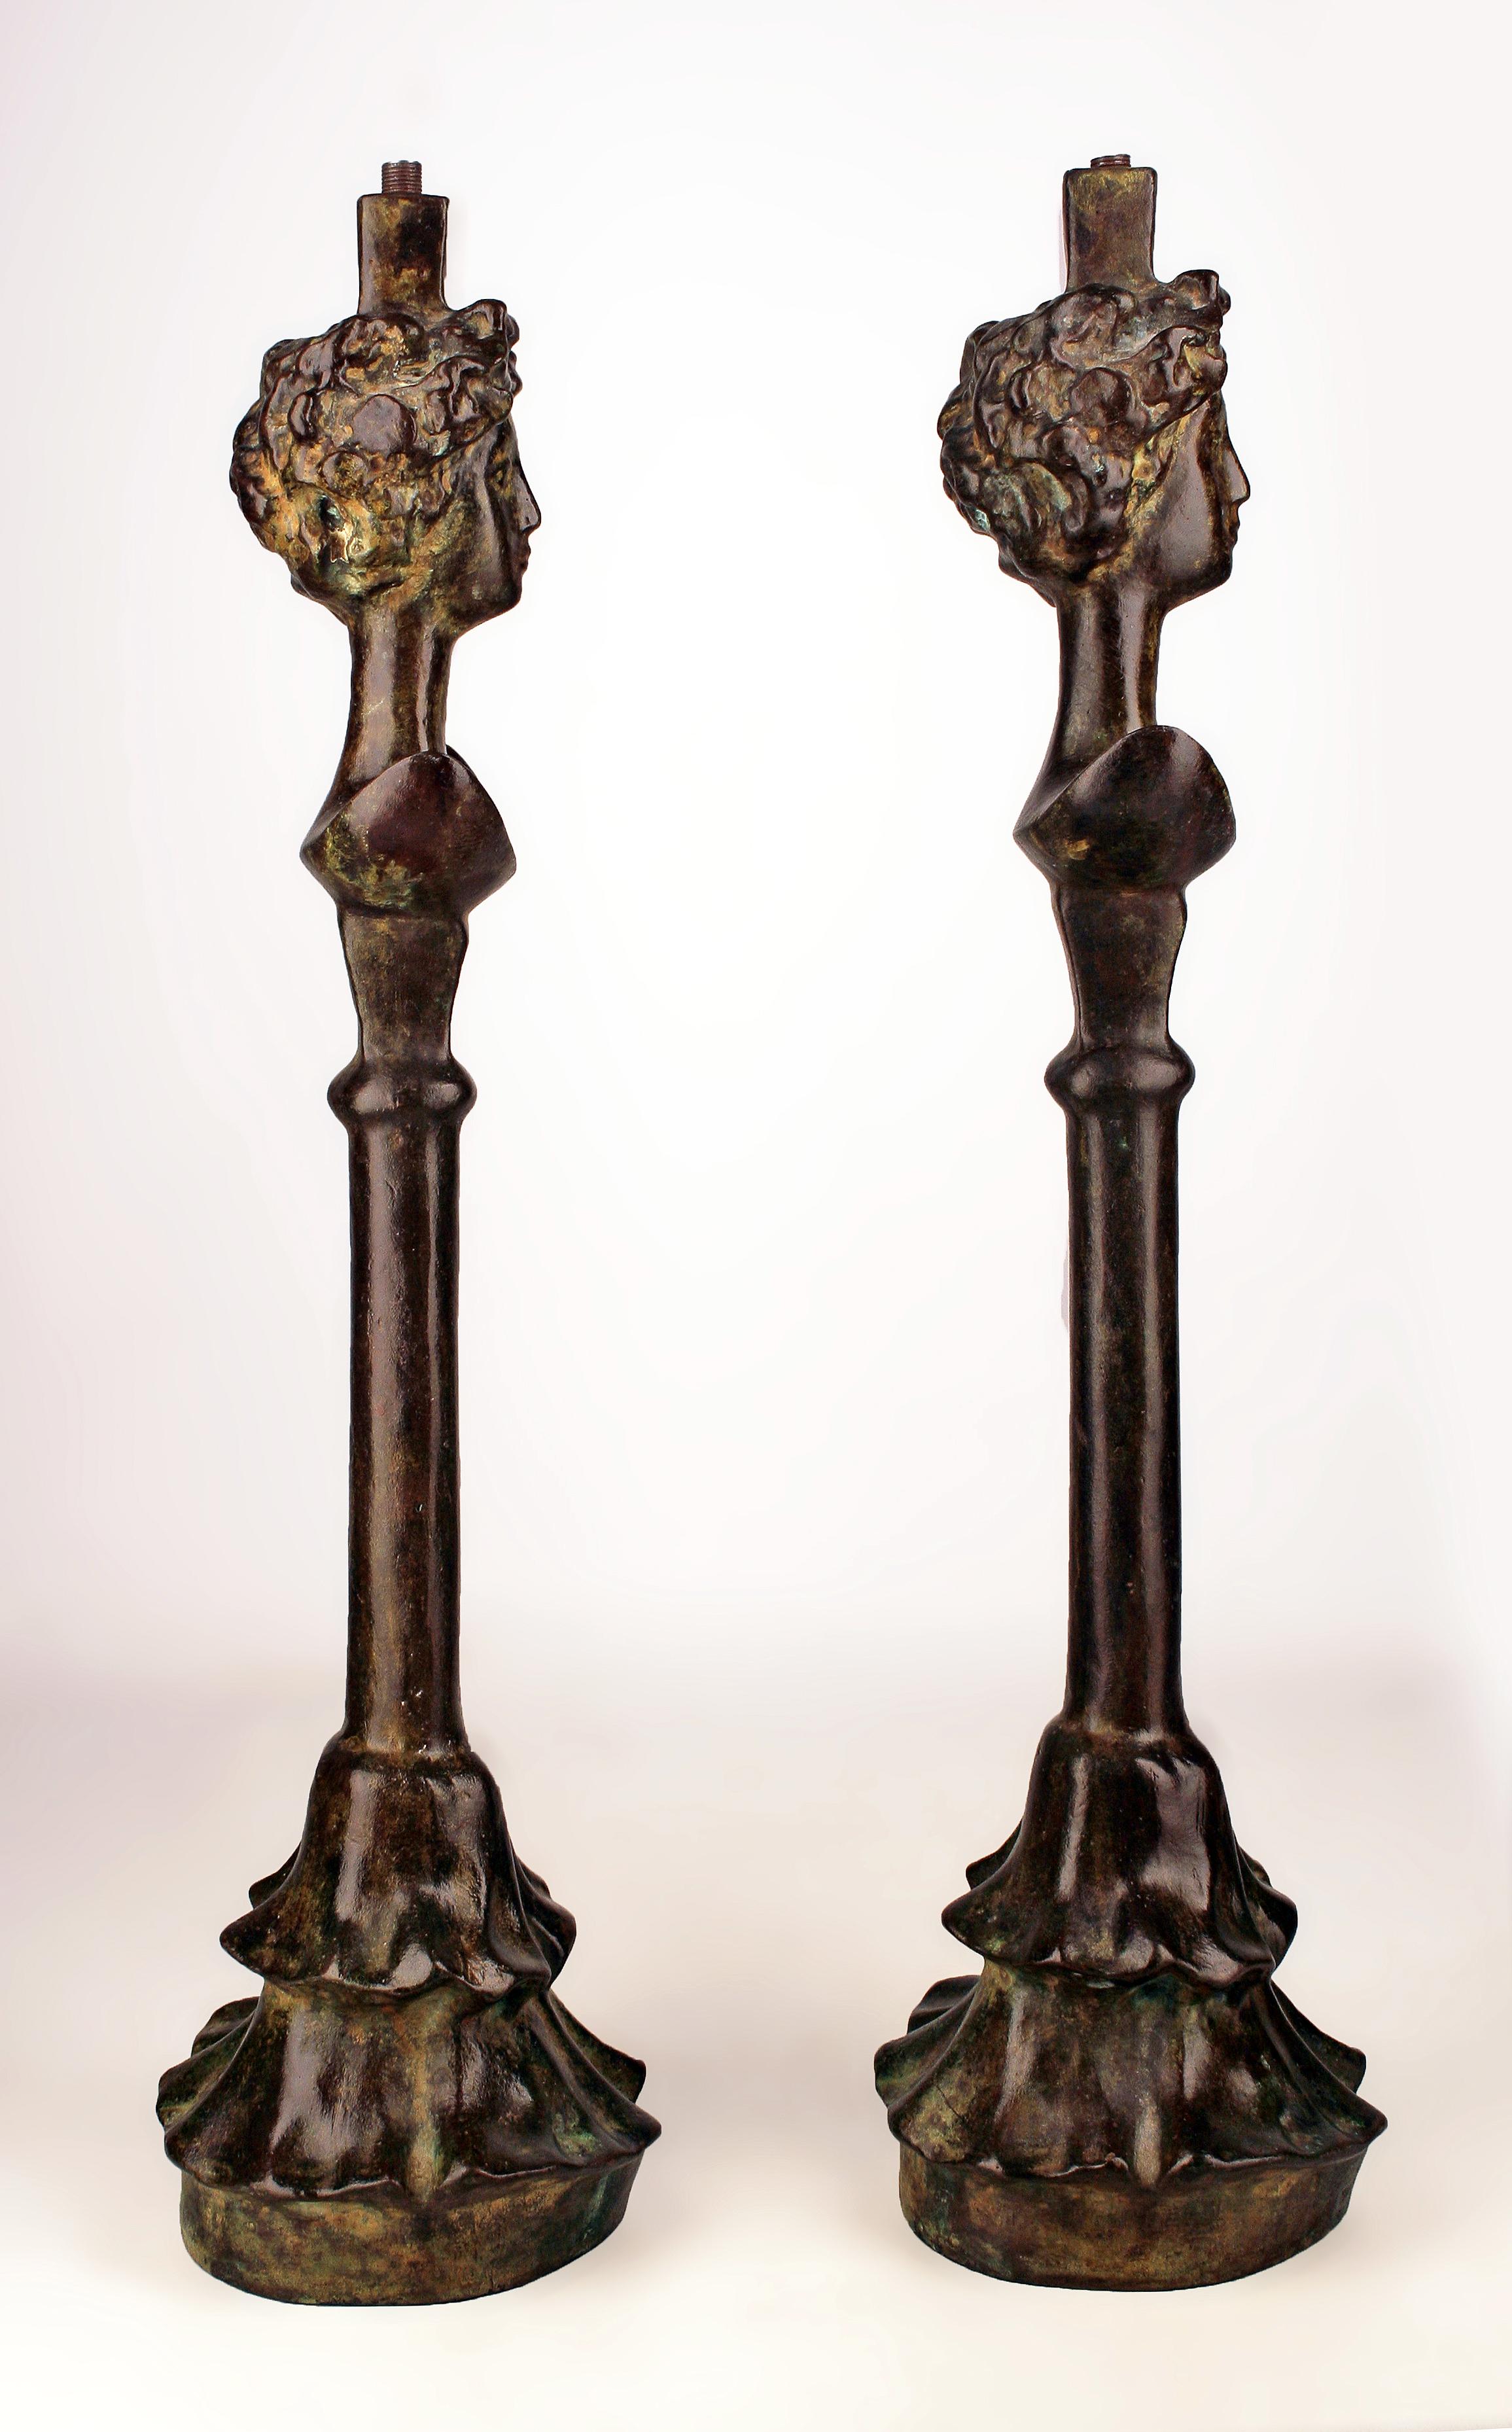 American Rockefeller Collection's Bronze Lamps Set Based on Giacometti's 'Tête de Femme' For Sale